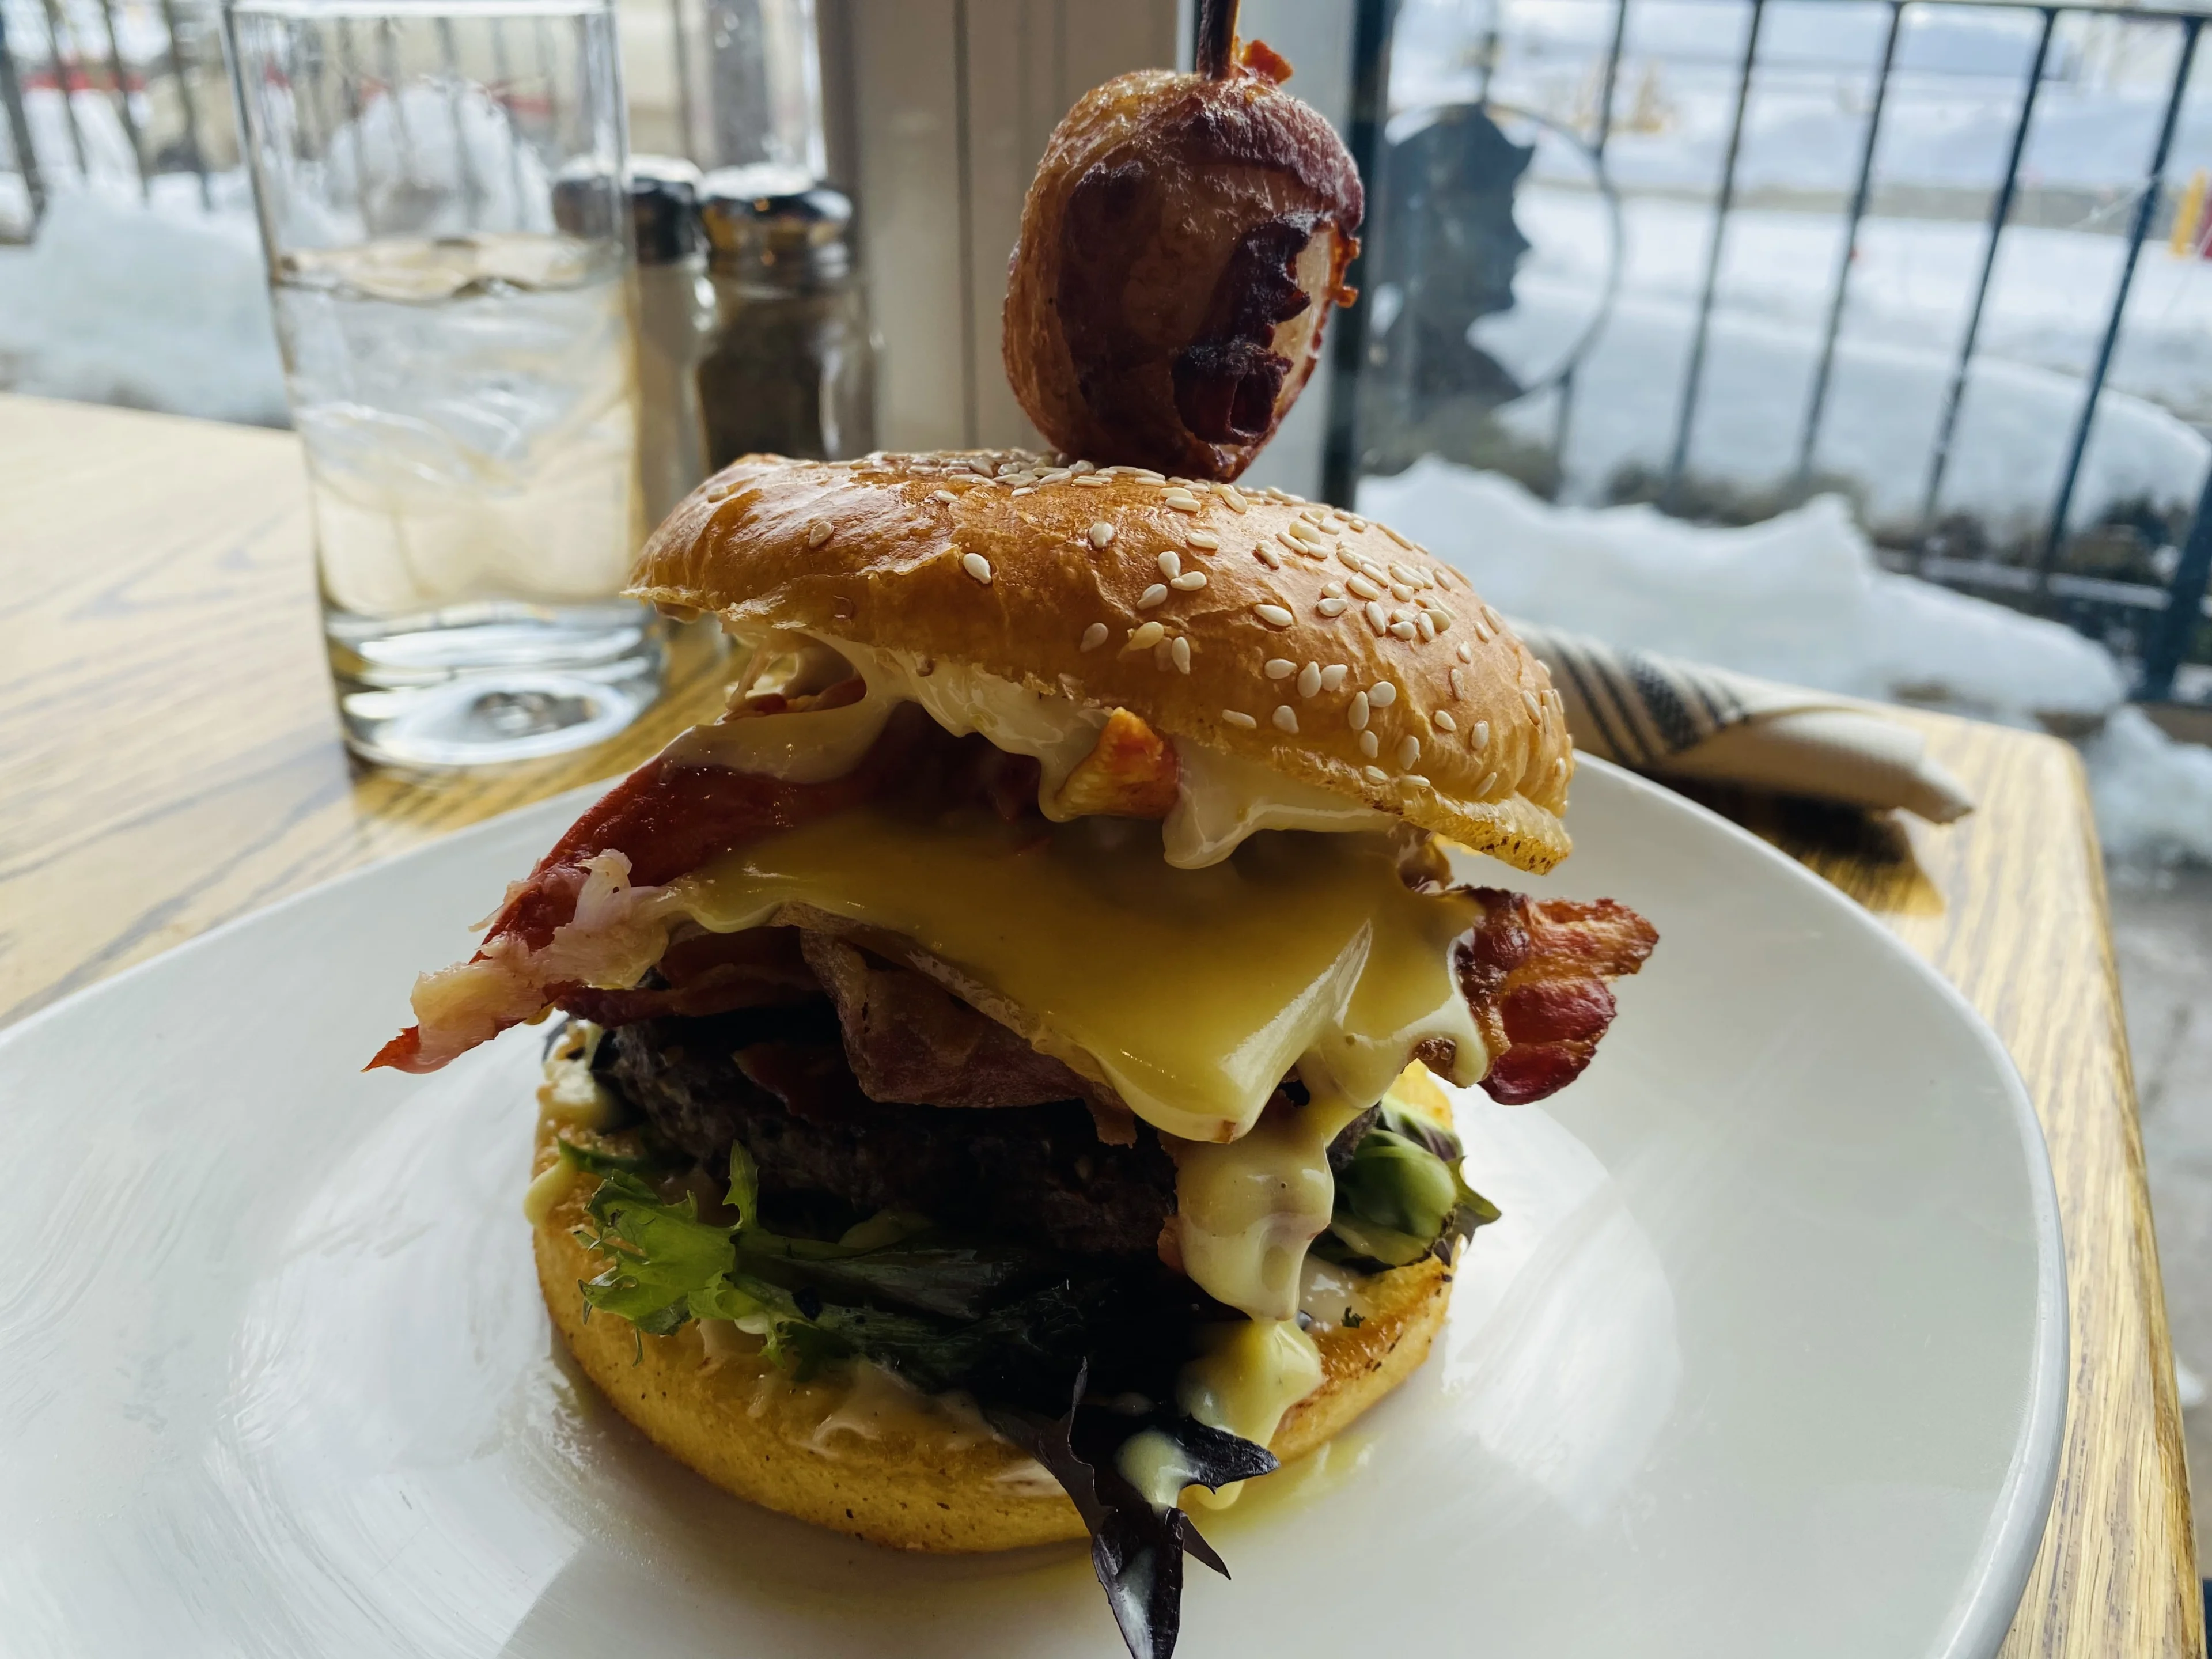 Lunenburger: Six ounces of hand formed fresh local ground beef, smoked mozzarella, smoked bacon, arugula, garlic aioli, generously topped with NS lobster, all knuckle & claw meat, and a tarragon butter